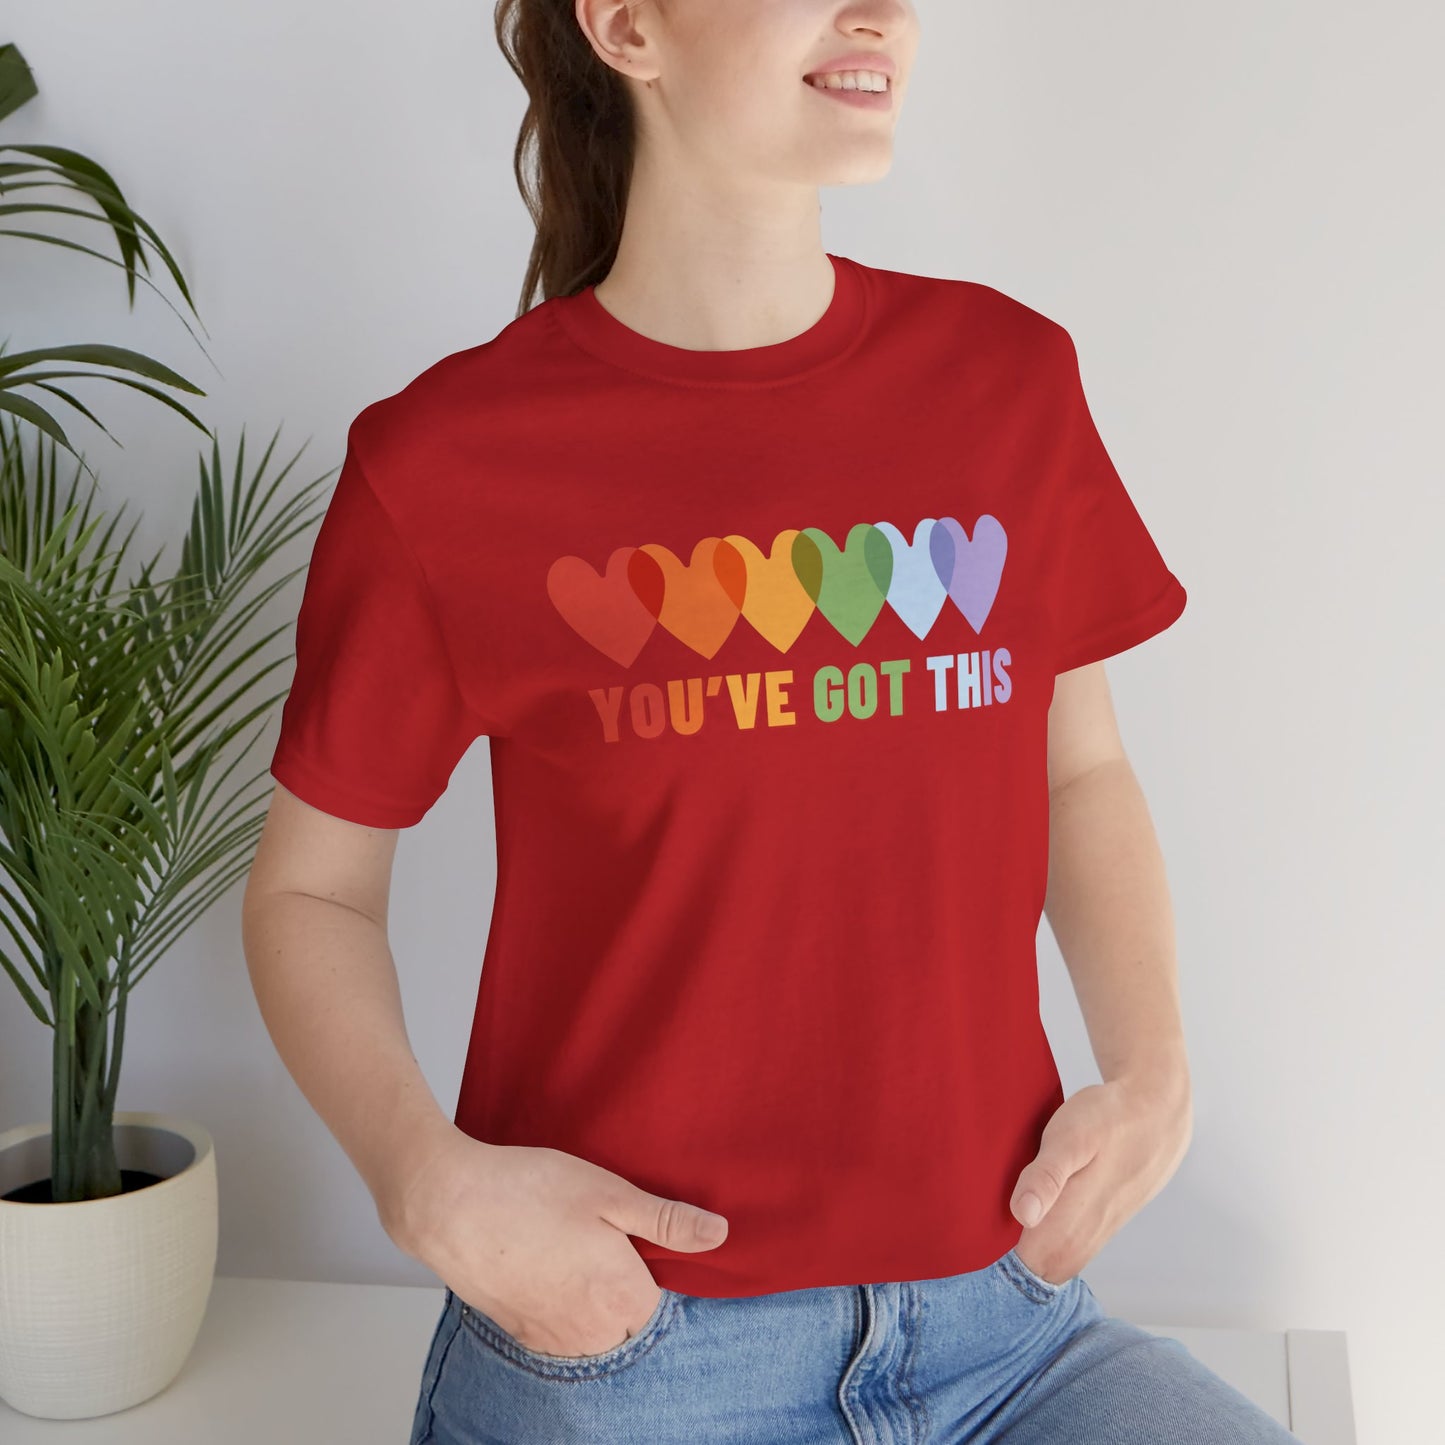 You've Got This with Hearts - Soft Cotton Adult Unisex T-Shirt, Gift for friends and family, Gift for friends and family by clothezy.com - Buy Now